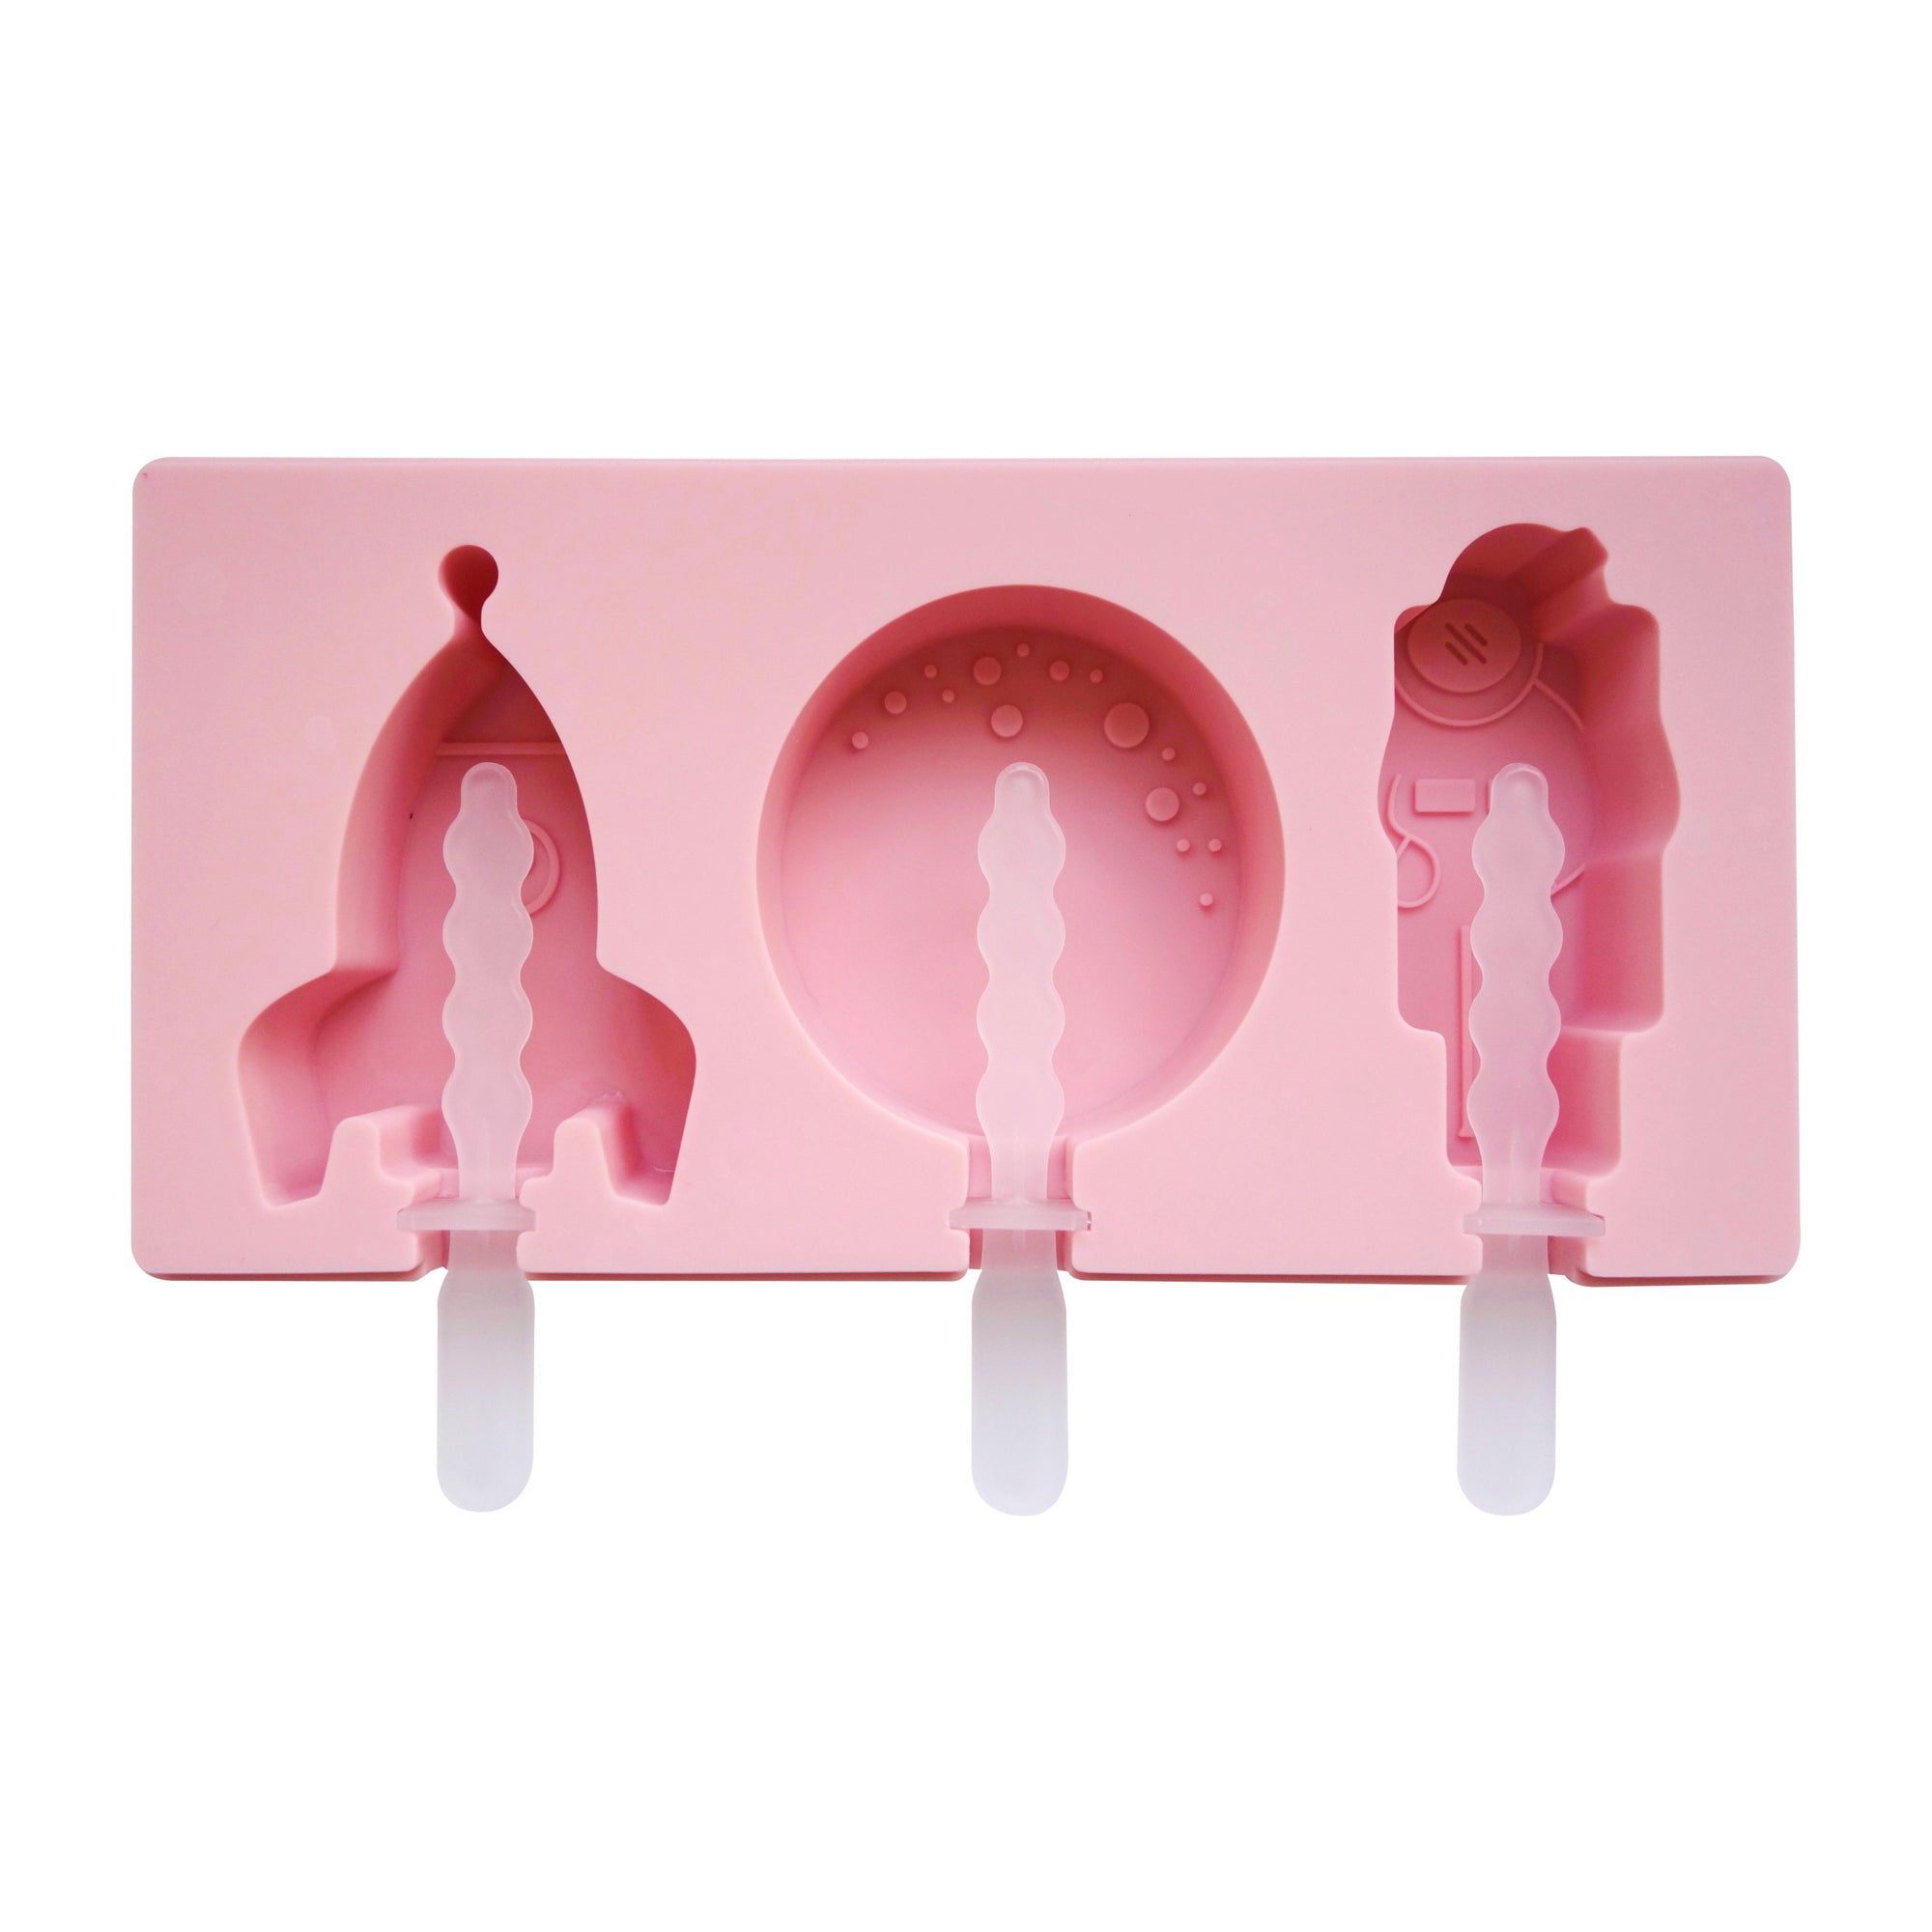 space popsicle mold yummy gummy molds